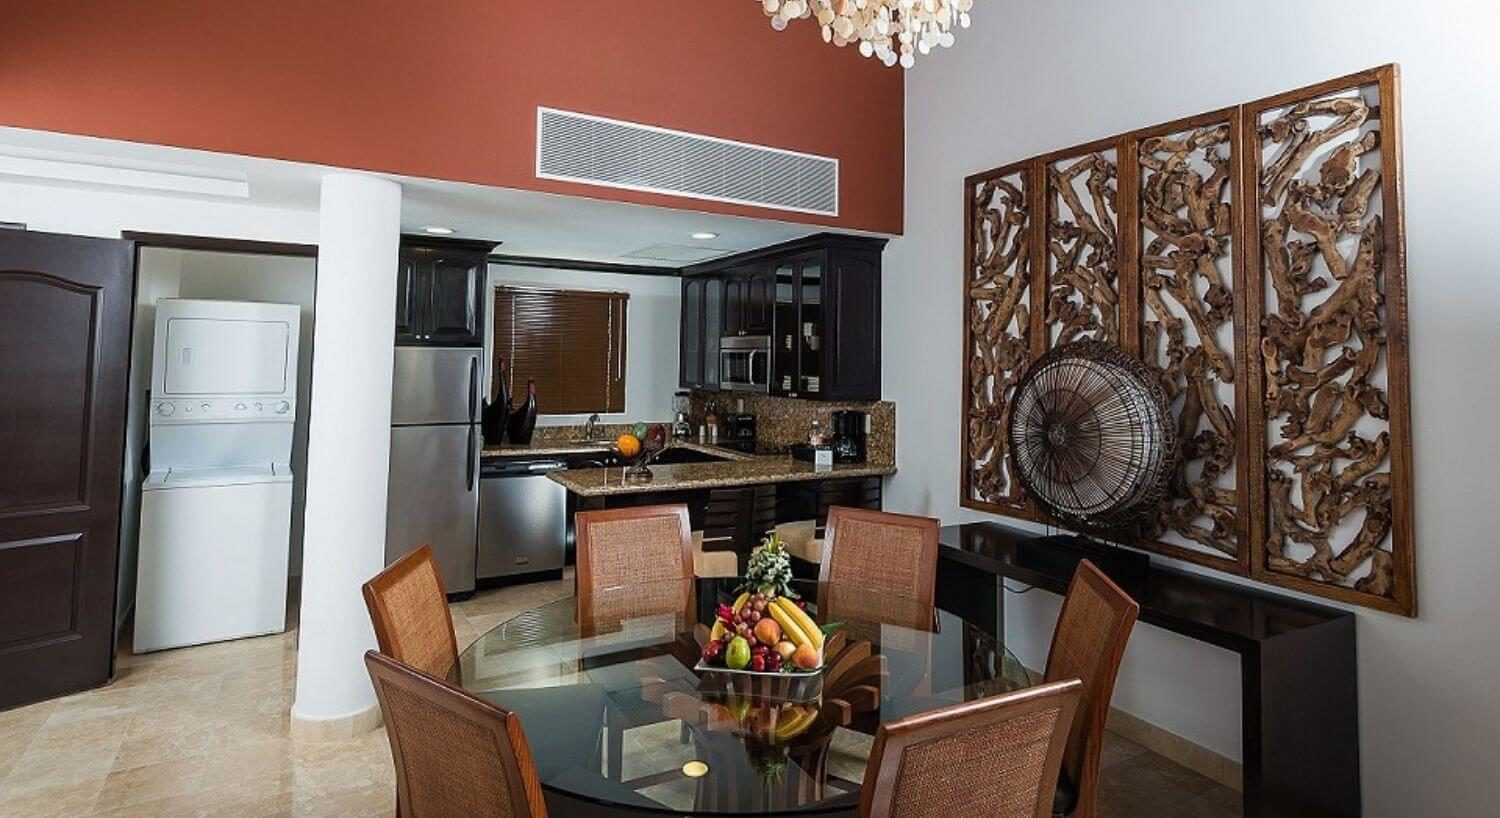 A kitchen and dining room with a U shaped kitchen with stainless steel appliances, granite countertops, dark brown cupboards, a round glass table with six chairs, and a closet with a stacked washer and dryer.